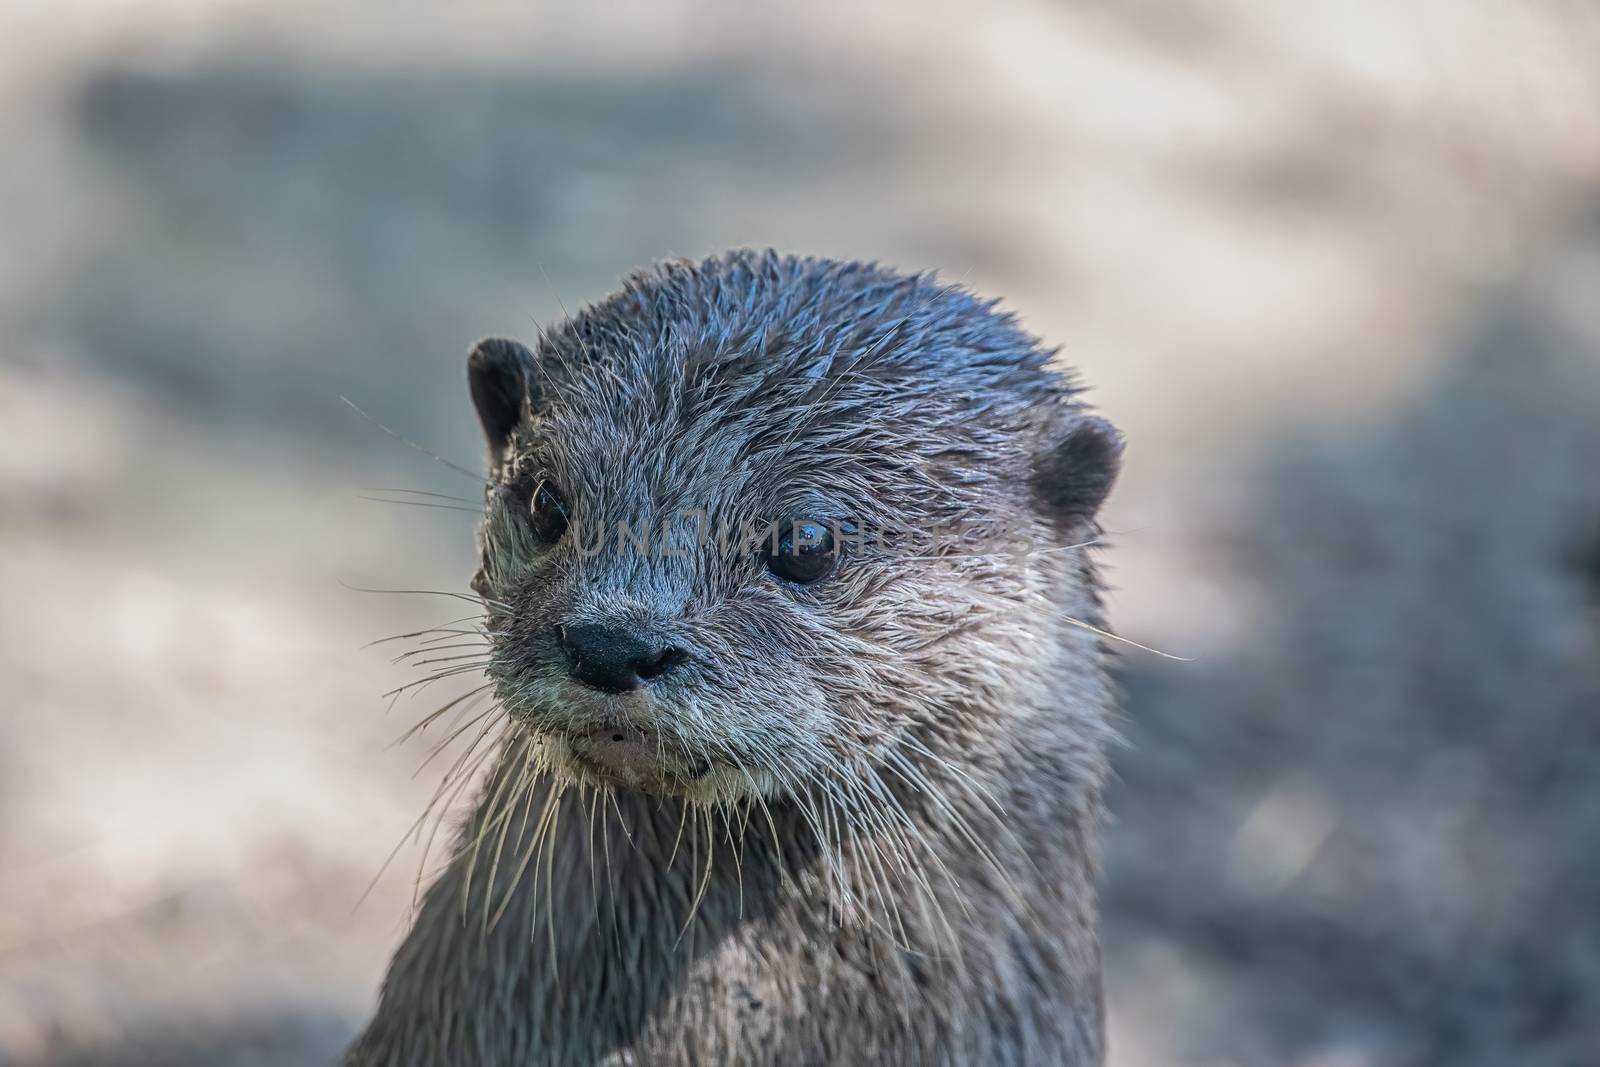 Asian small-clawed otter (Amblonyx cinerea) by Russell102